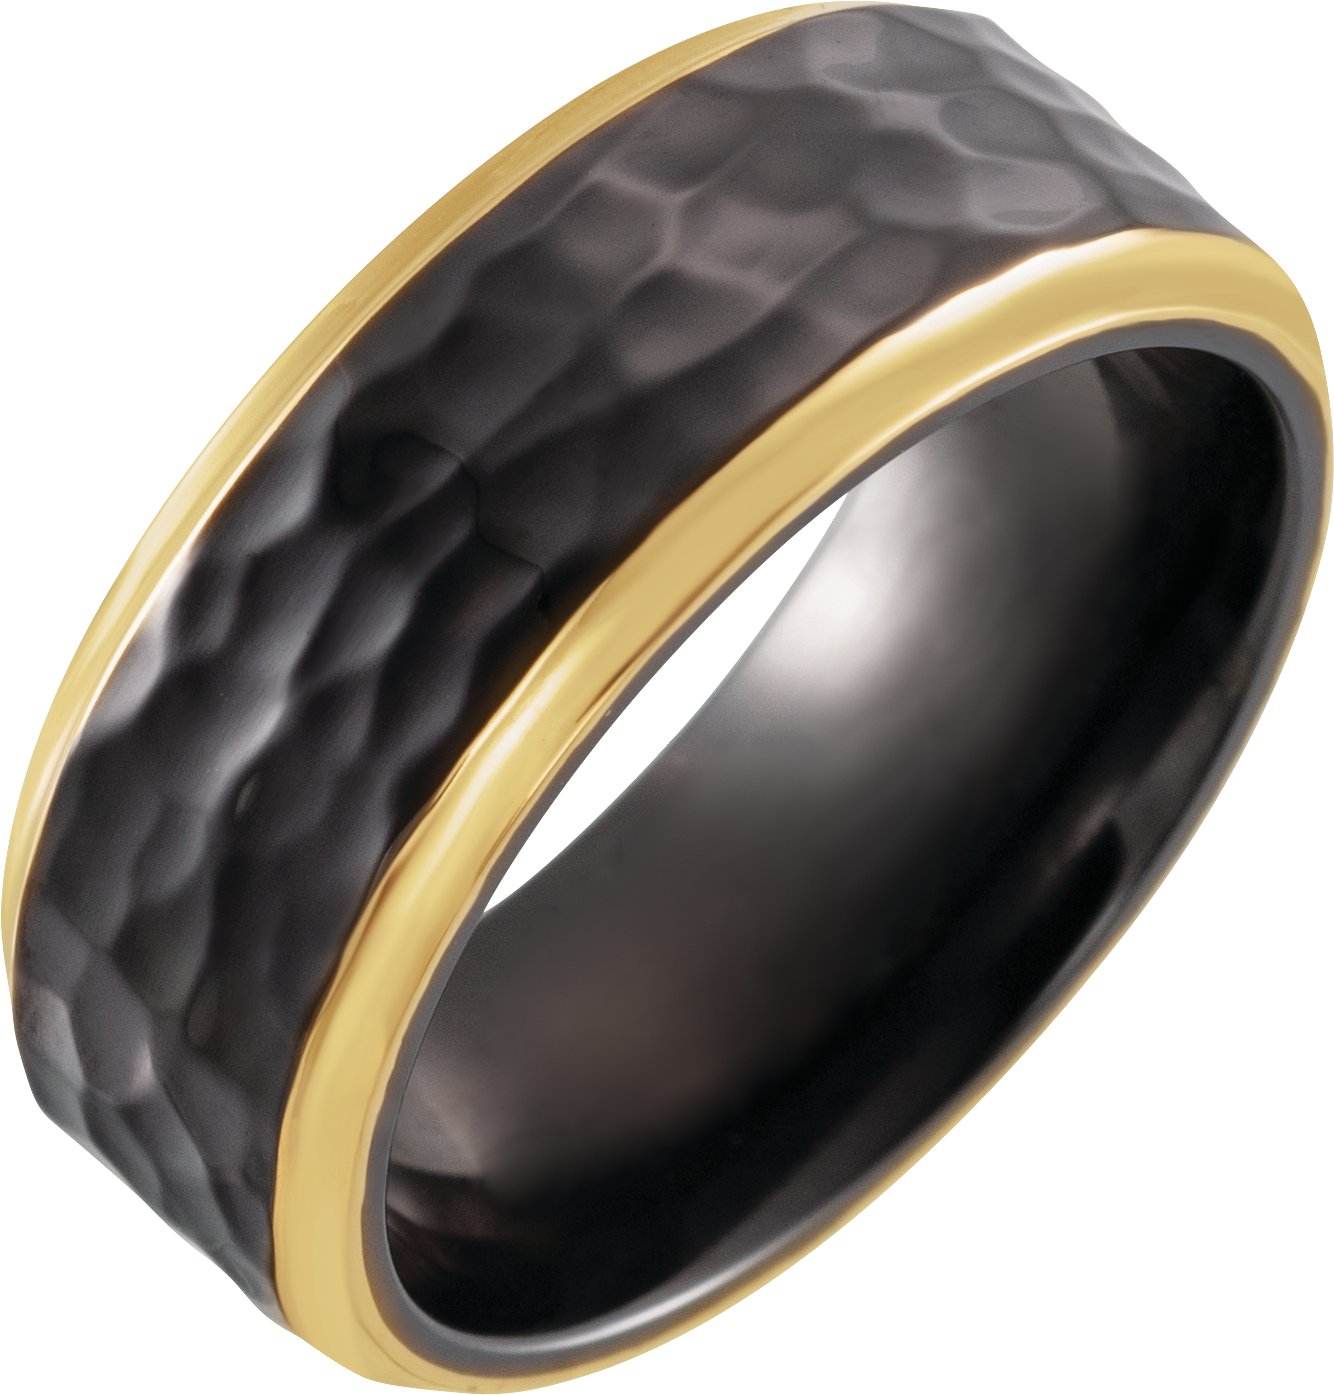 18K Yellow Gold PVD Black Titanium 8 mm Flat Size 11 Band with Hammer Finish